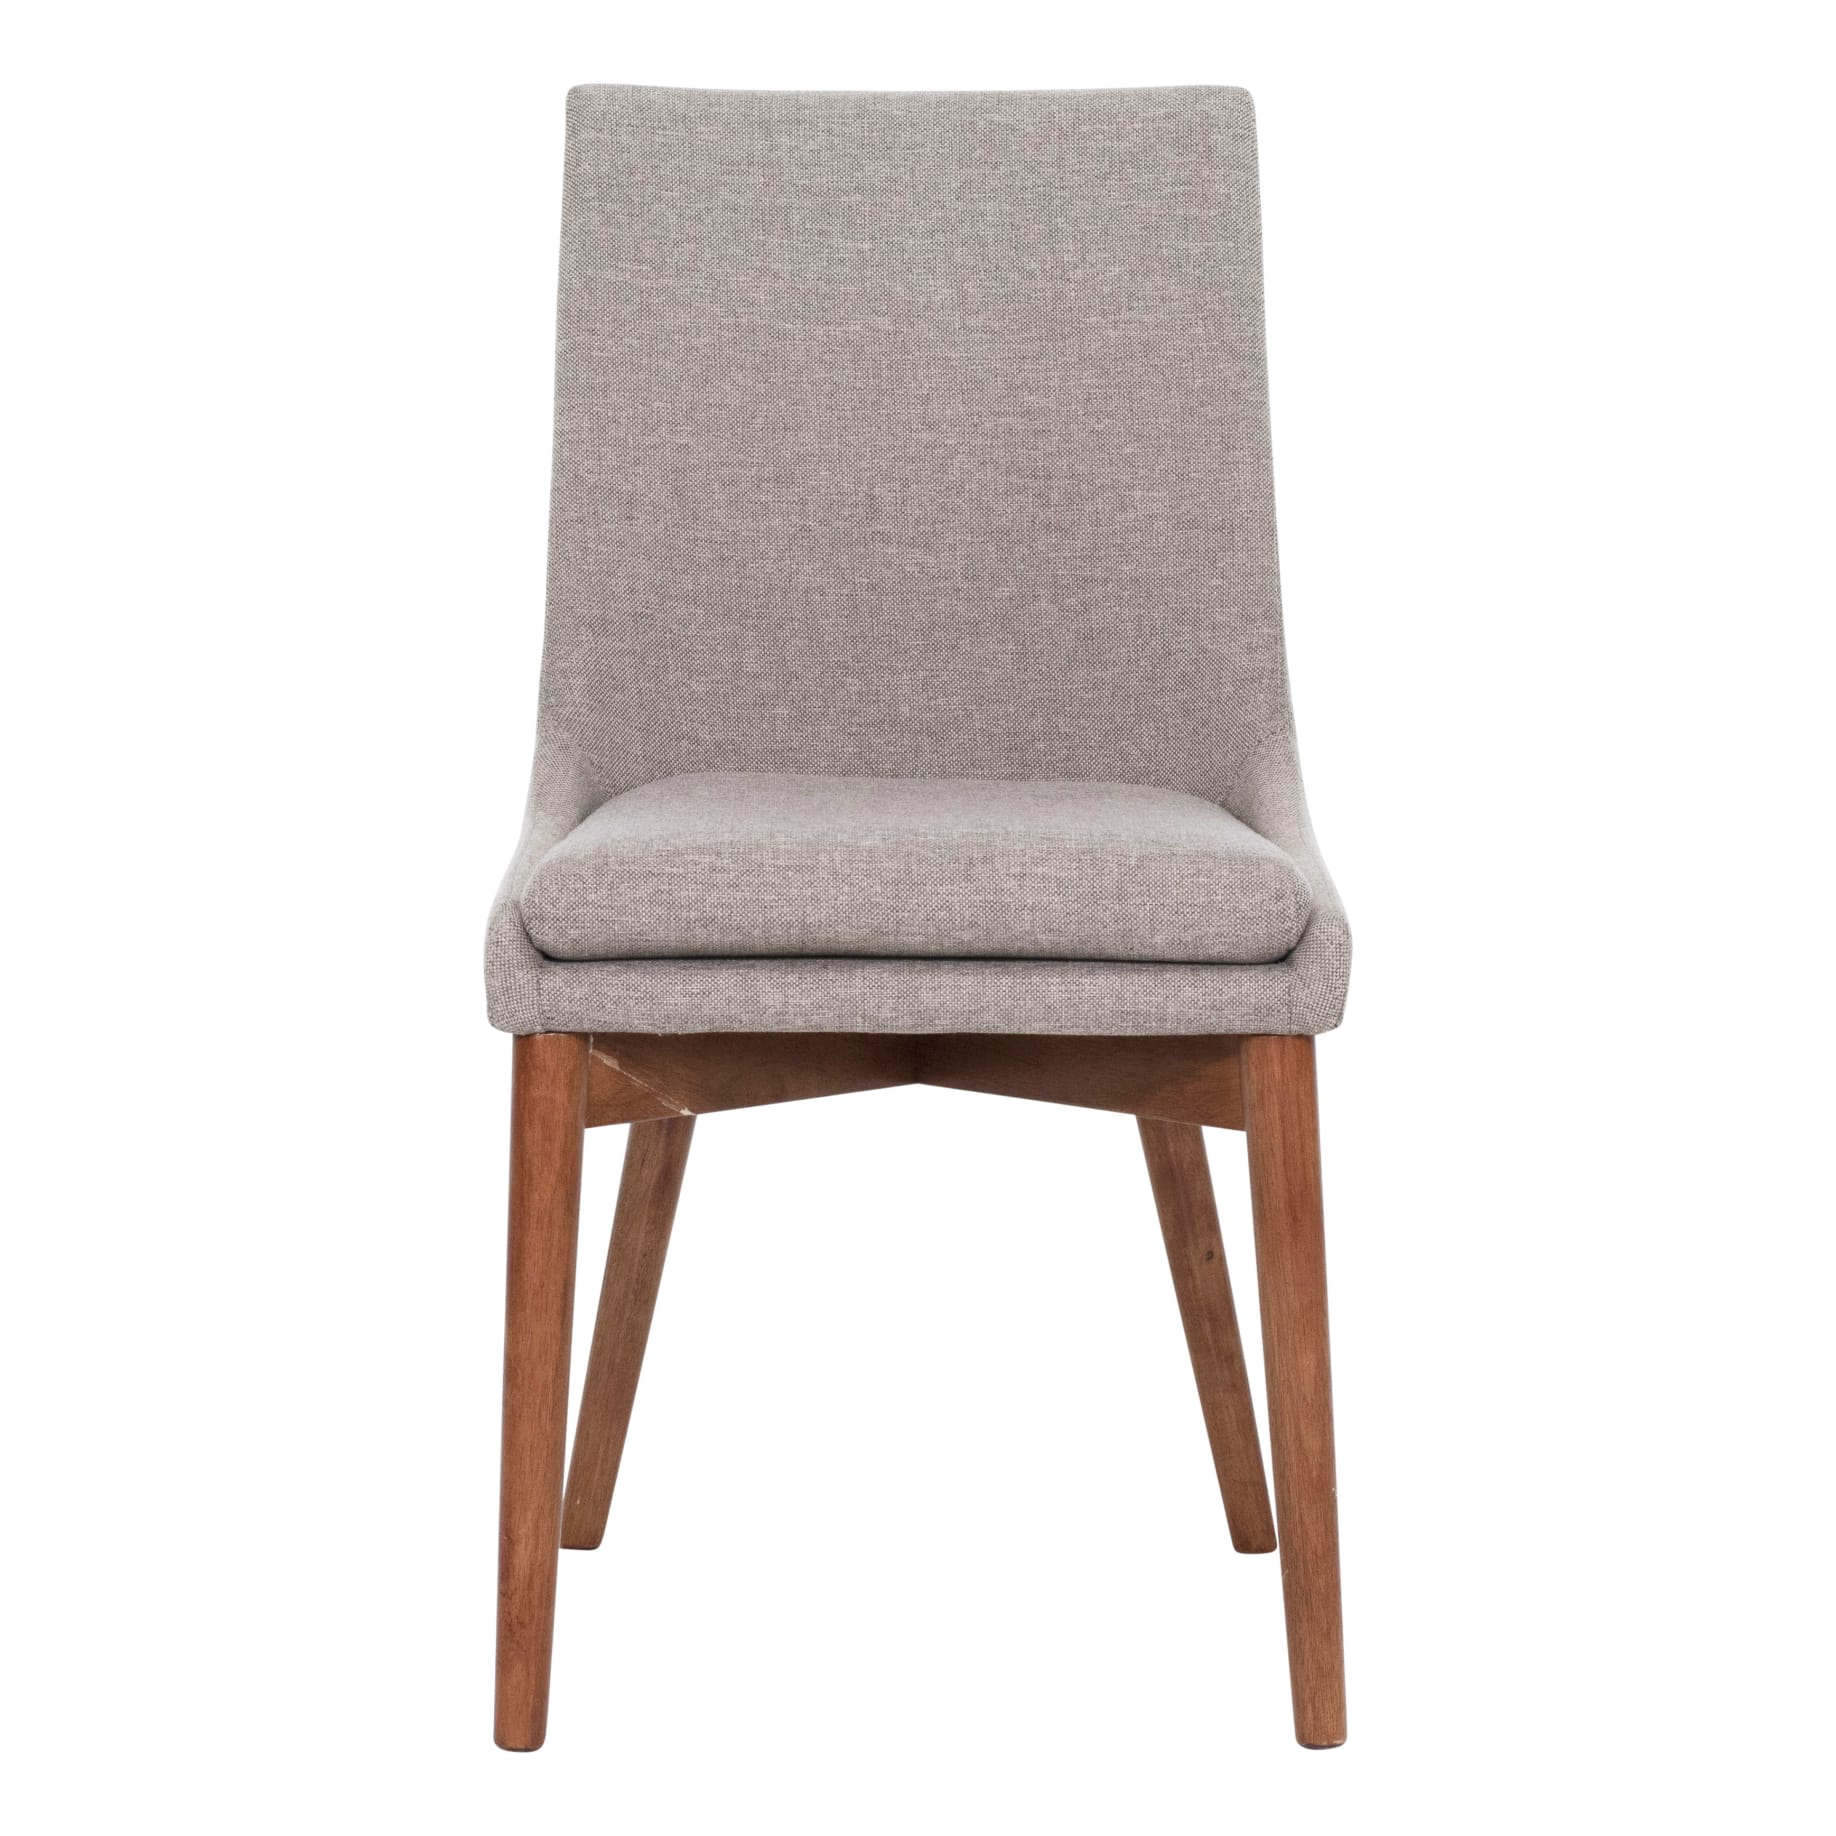 Highland Dining Chair in Brown Fabric / Blackwood Stain